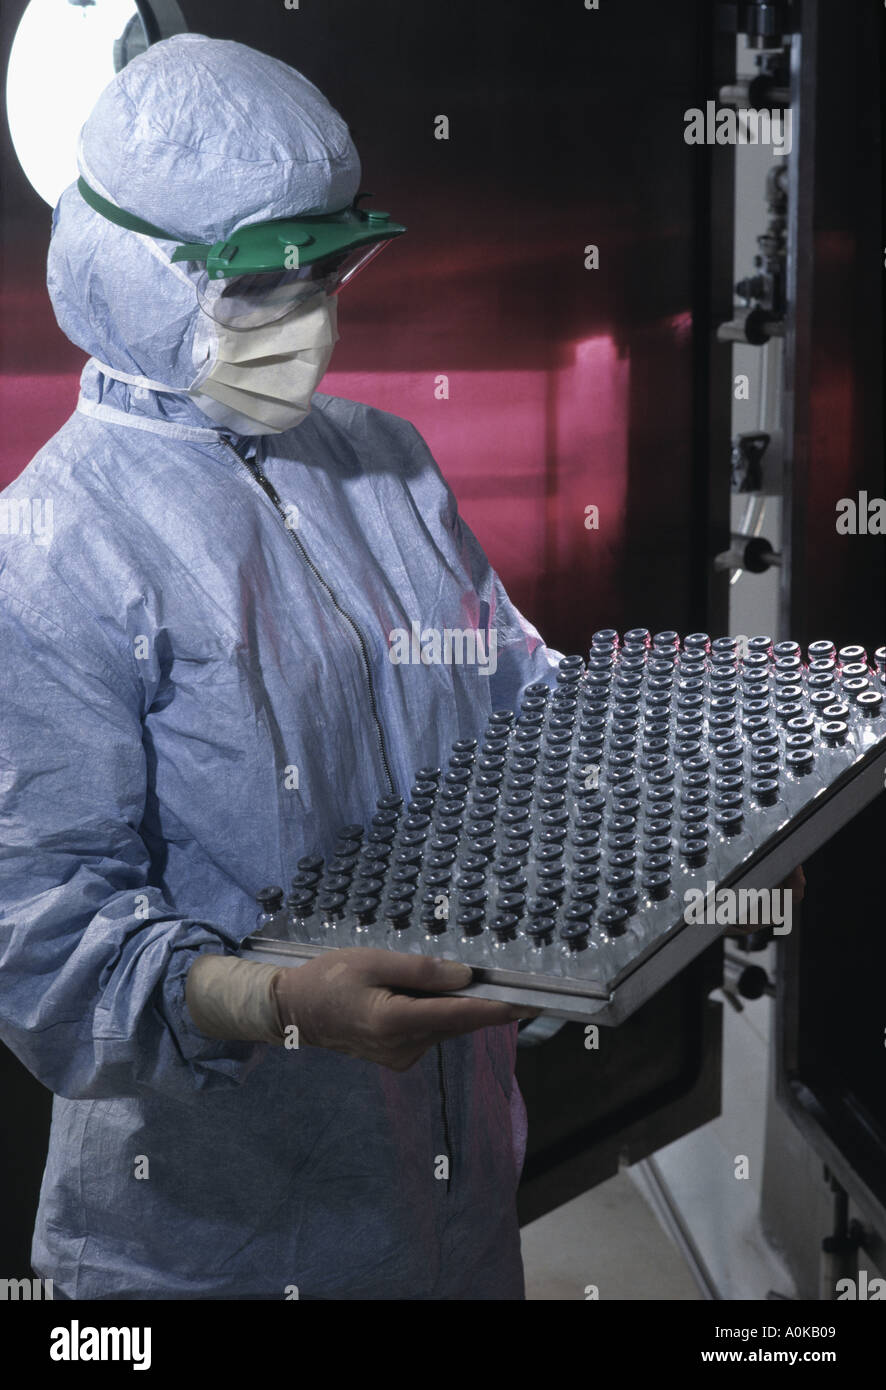 Pharmaceutical manufacturing in a sterile cleanroom environment Stock Photo